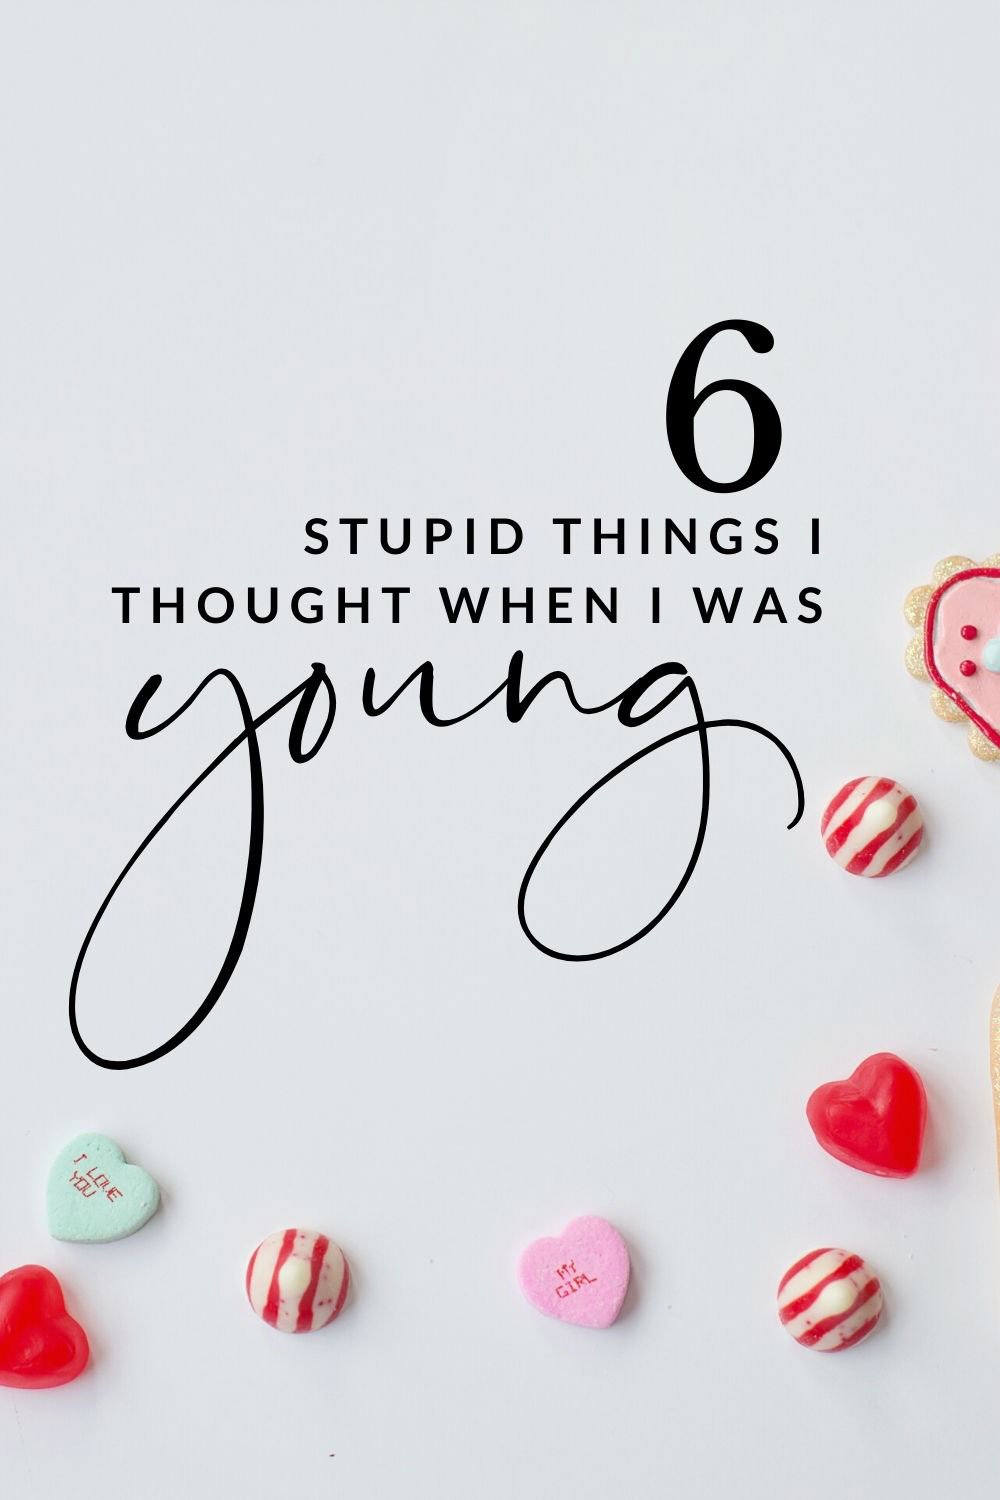 6 stupid things I thought when I was young